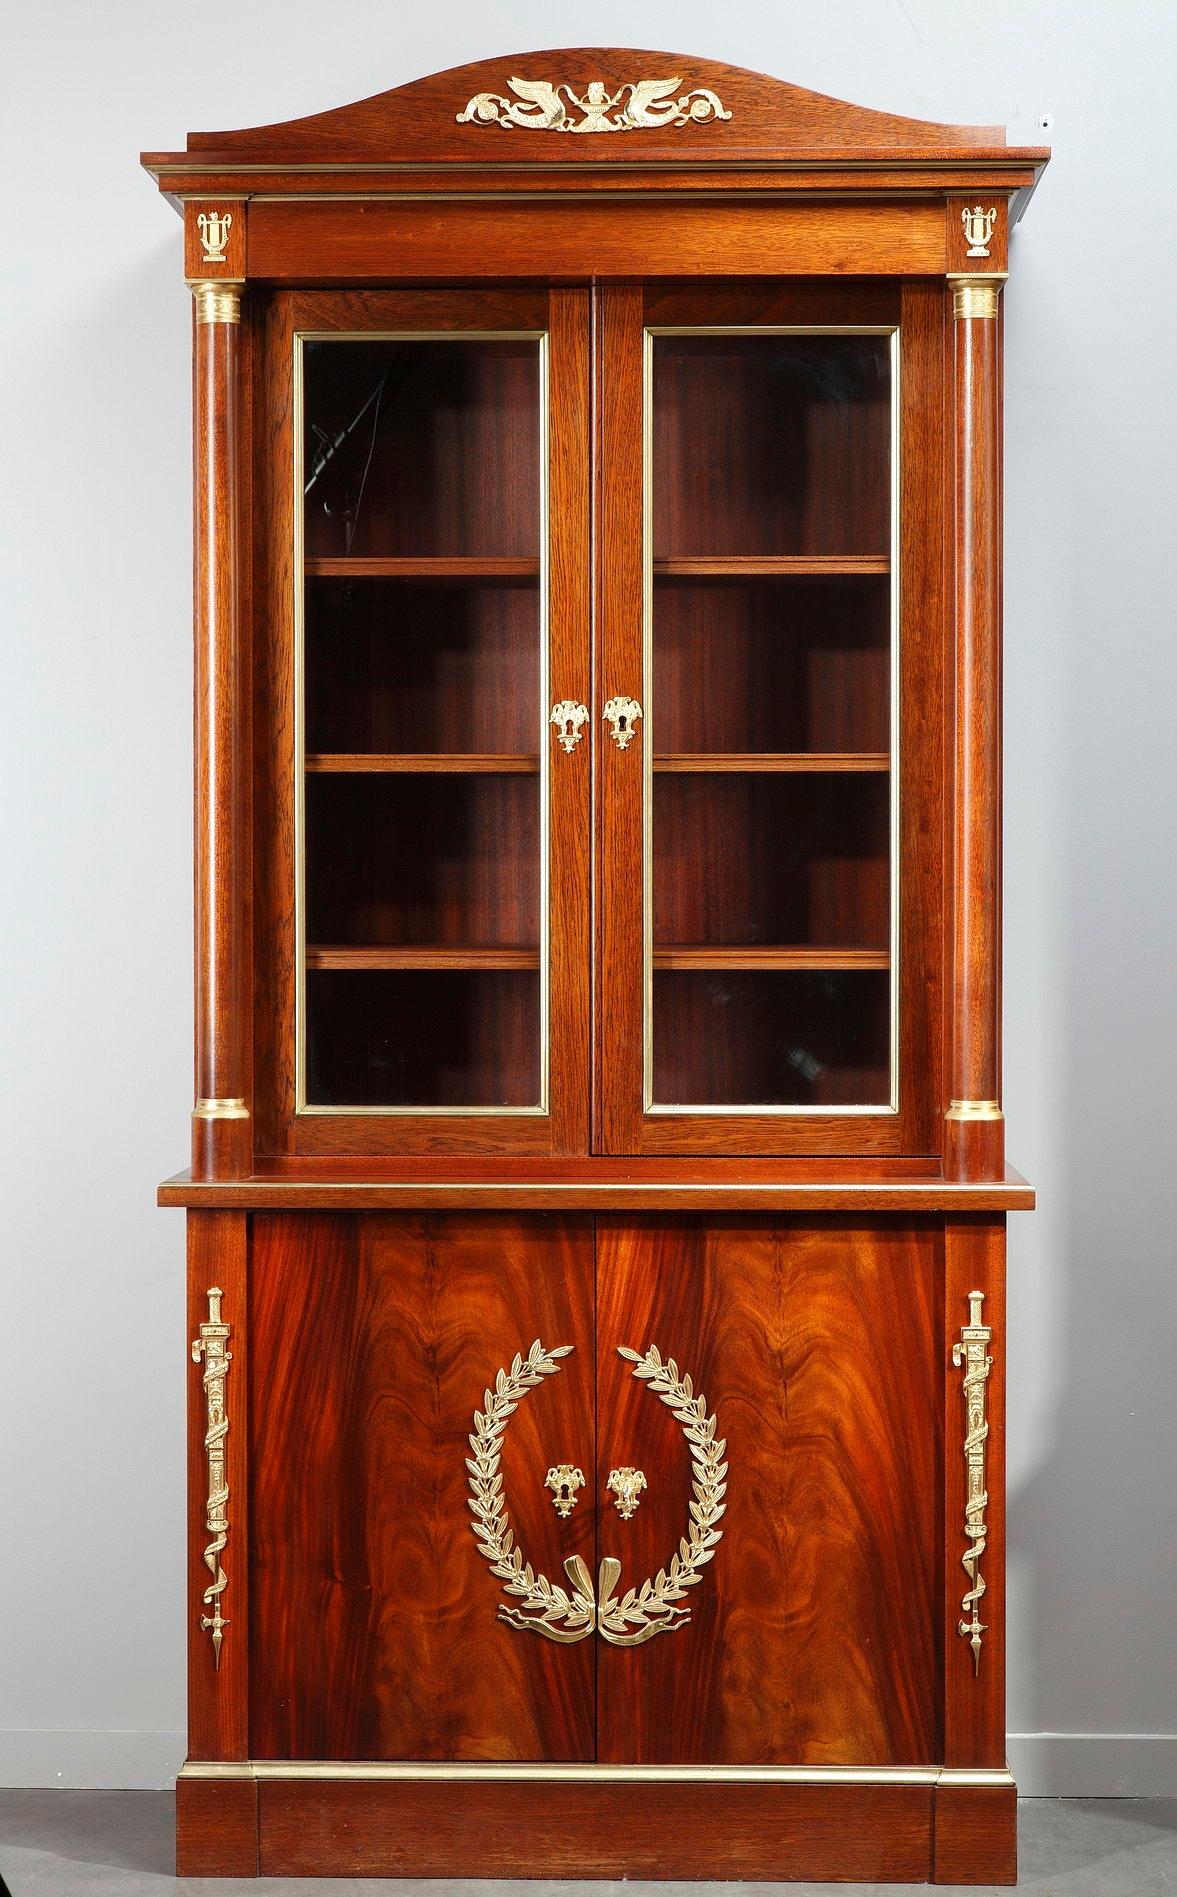 This monumental pair of Empire-style bookcases, or cabinets, was crafted in mahogany veneer by Maison Jansen (French, 1880-1989) in the mid-20th century.

Maison Jansen was renowned for his eclectic designs that blended the antique styles. Two